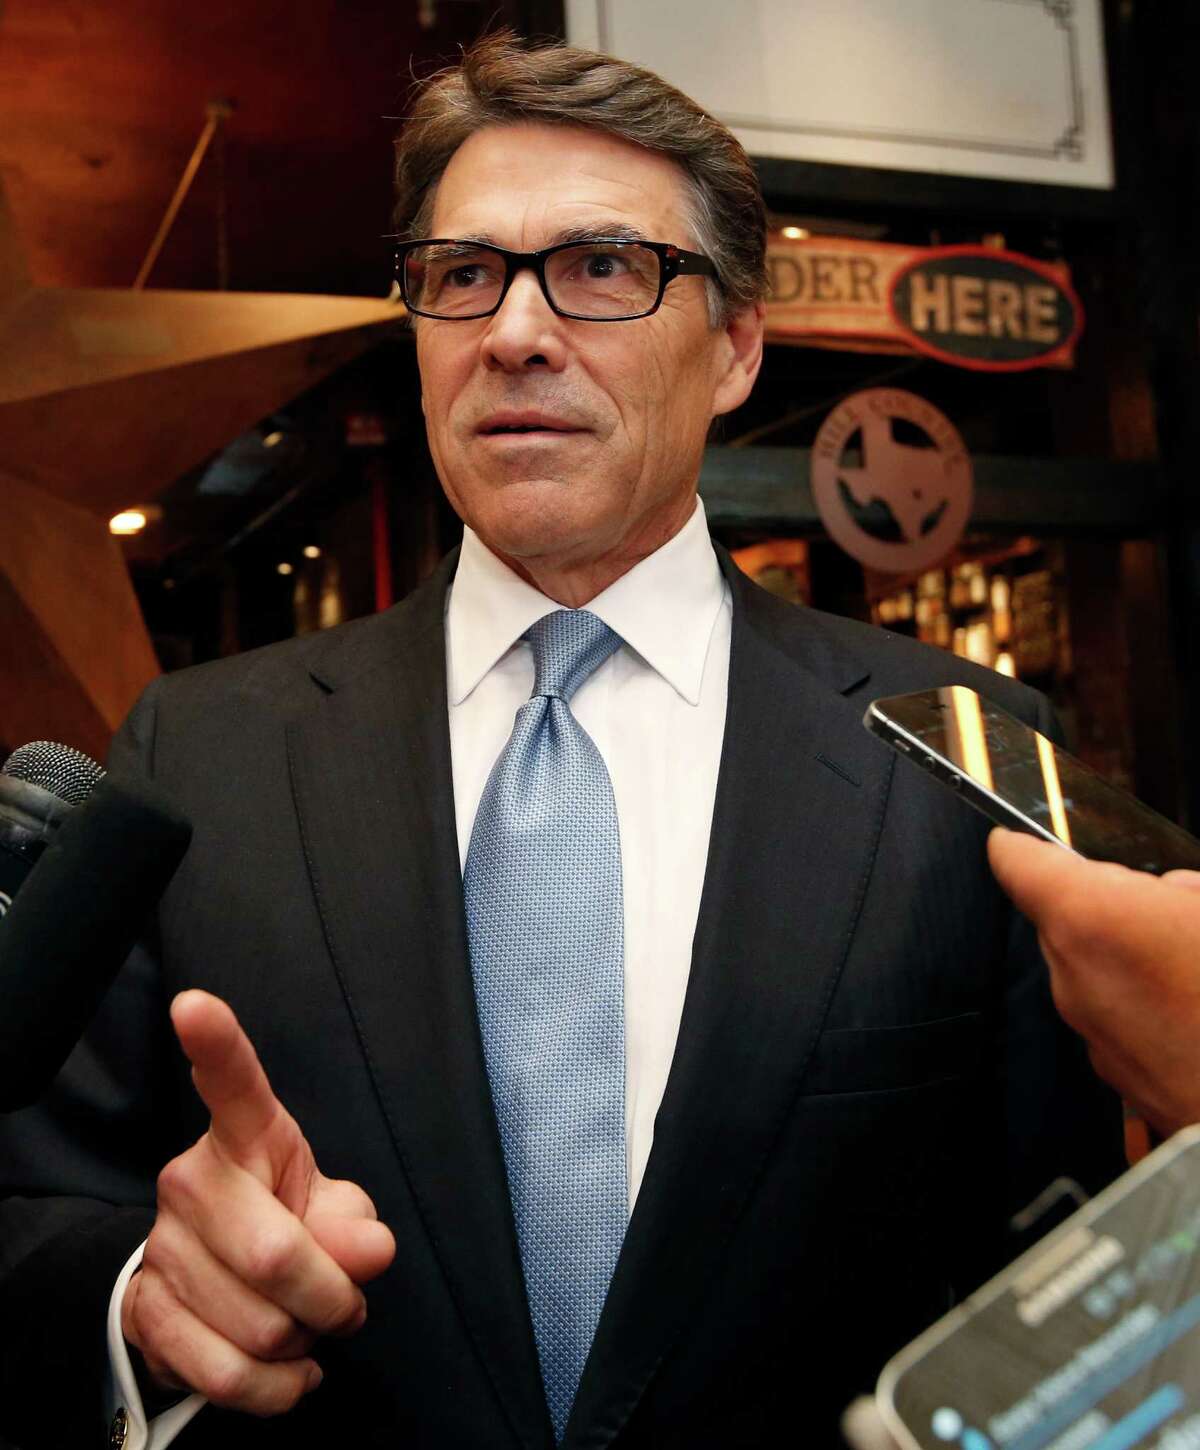 No. 2 state for business Texas Gov. Rick Perry speaks to reporters after meeting with business owners Wednesday, April 23, 2014, in New York. Perry made the trip to try to convince companies to move their operations to Texas, where he says the business climate is friendlier.